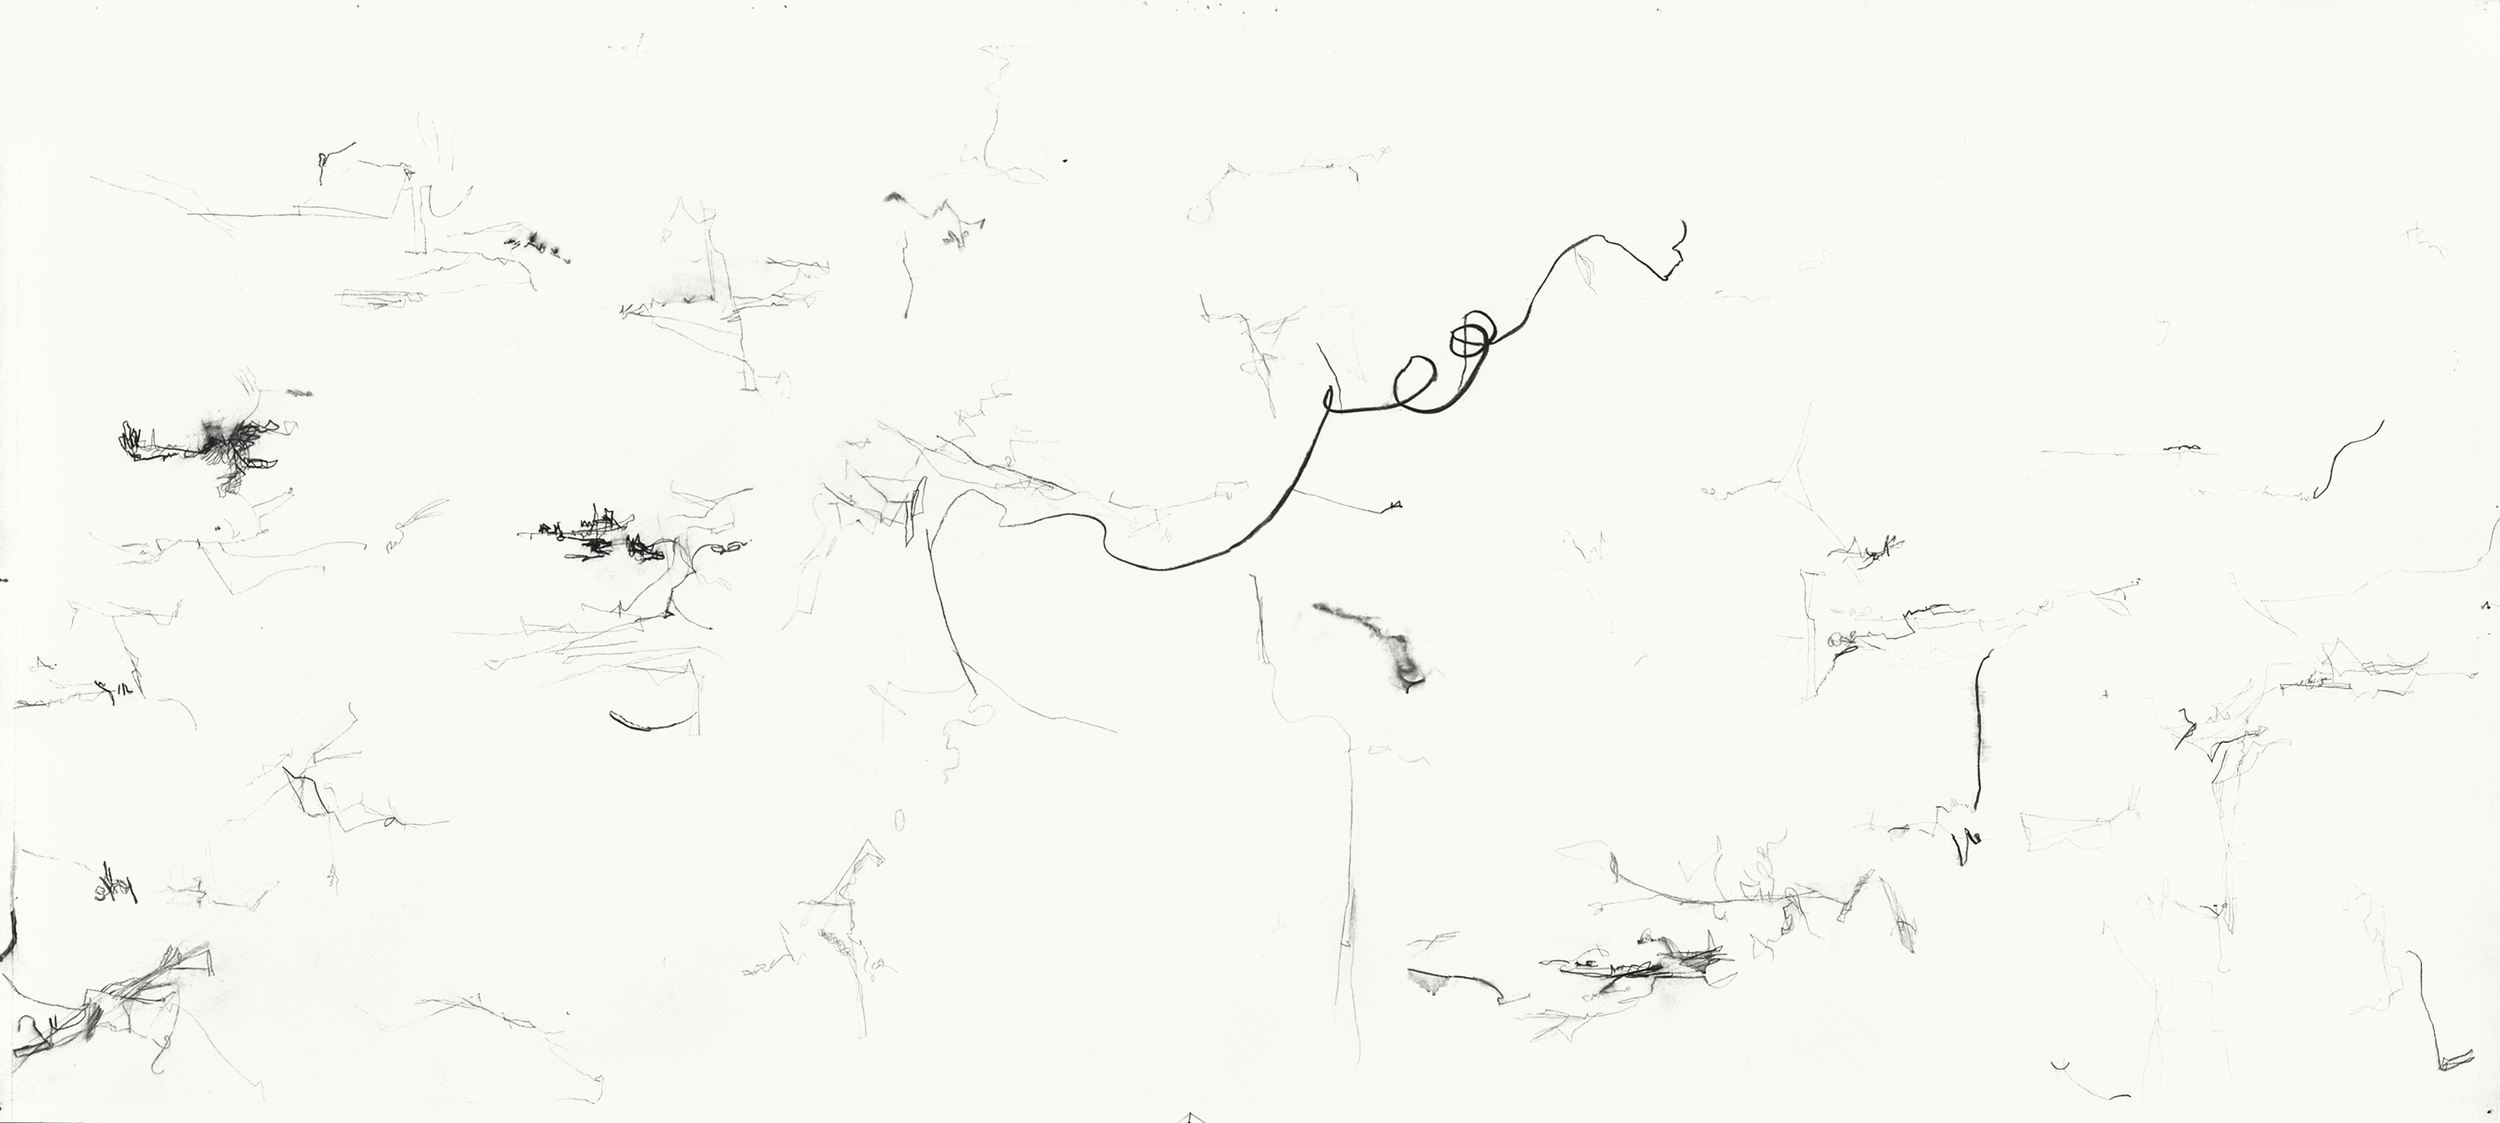   Untitled (L.98.9), 1998 charcoal, rabbit skin glue on paper 48 x 107 inches   